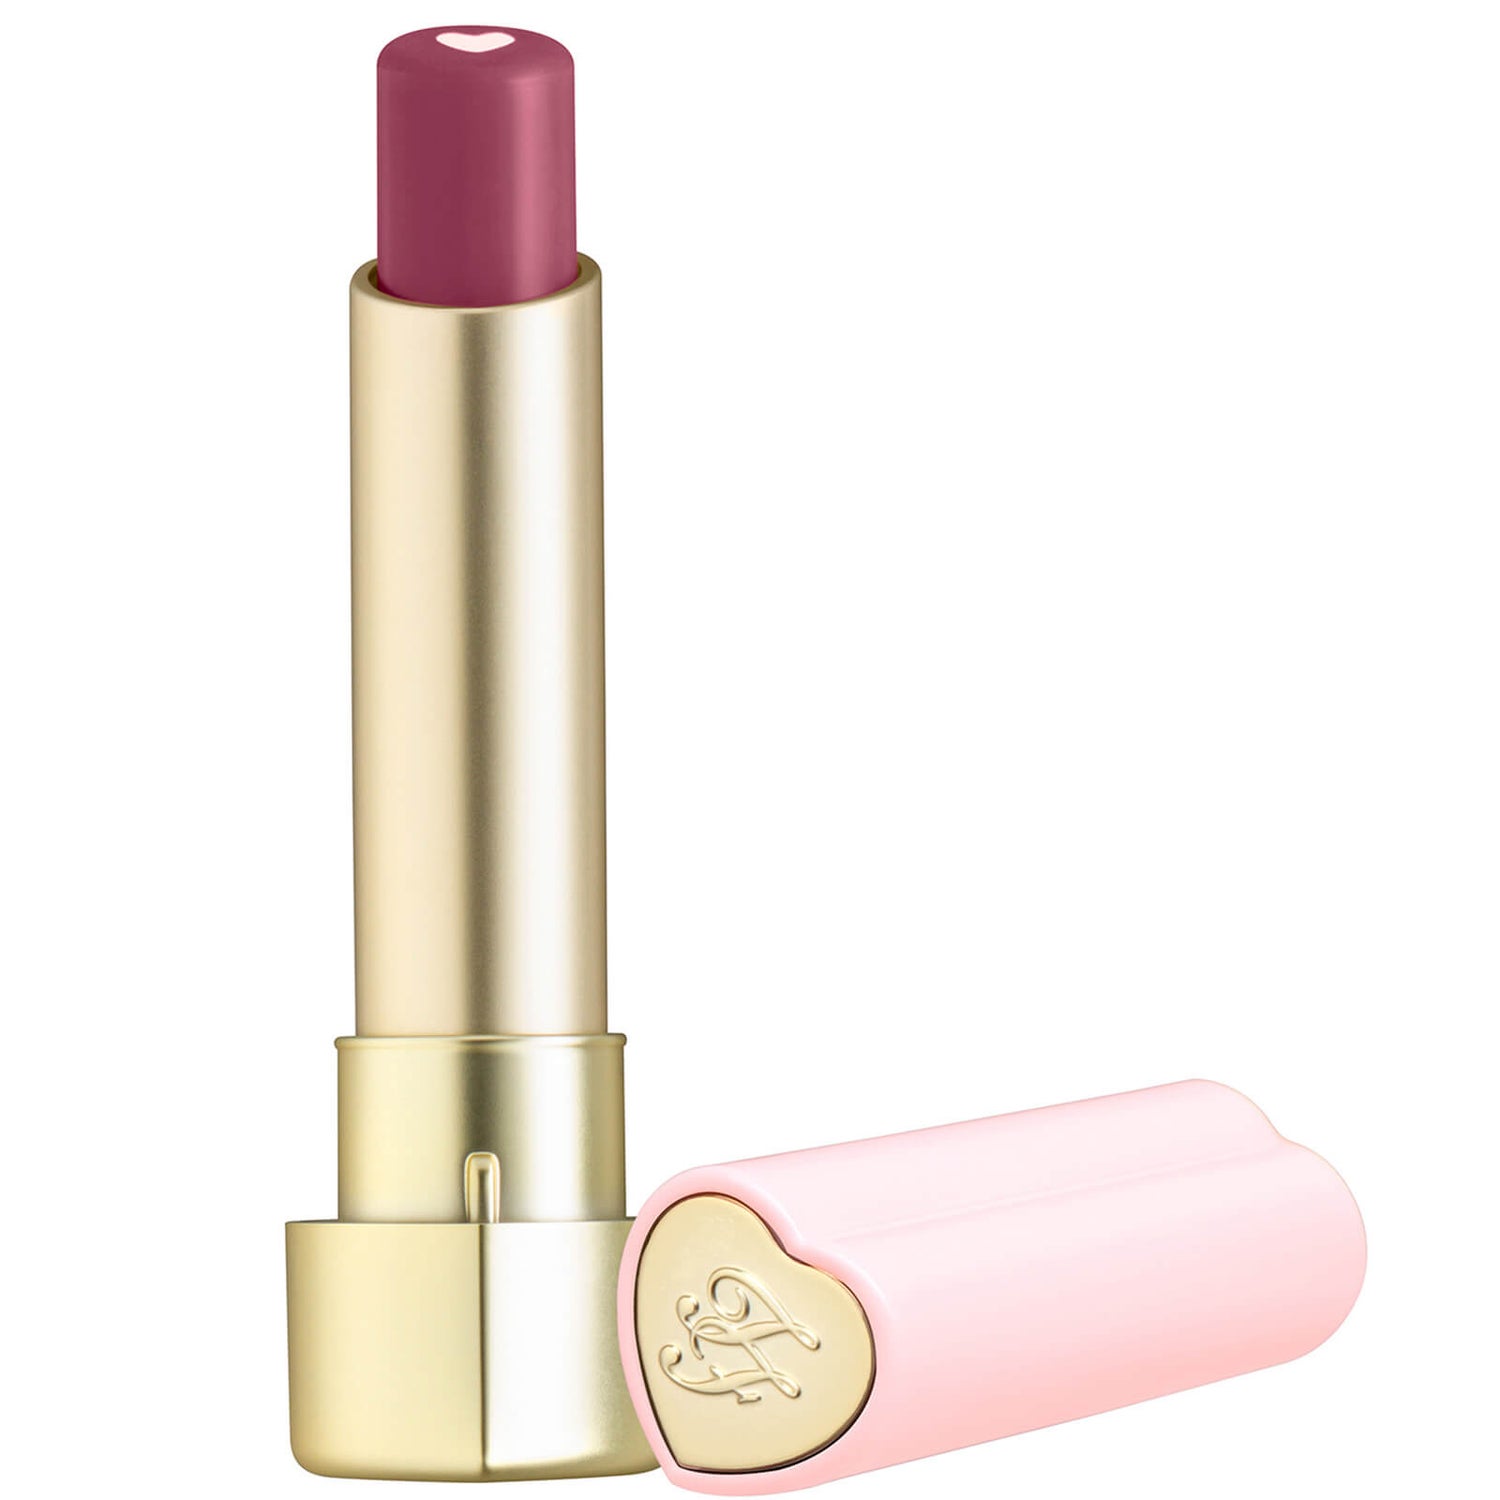 Too Faced Too Femme Heart Core Lipstick (Various Shades)